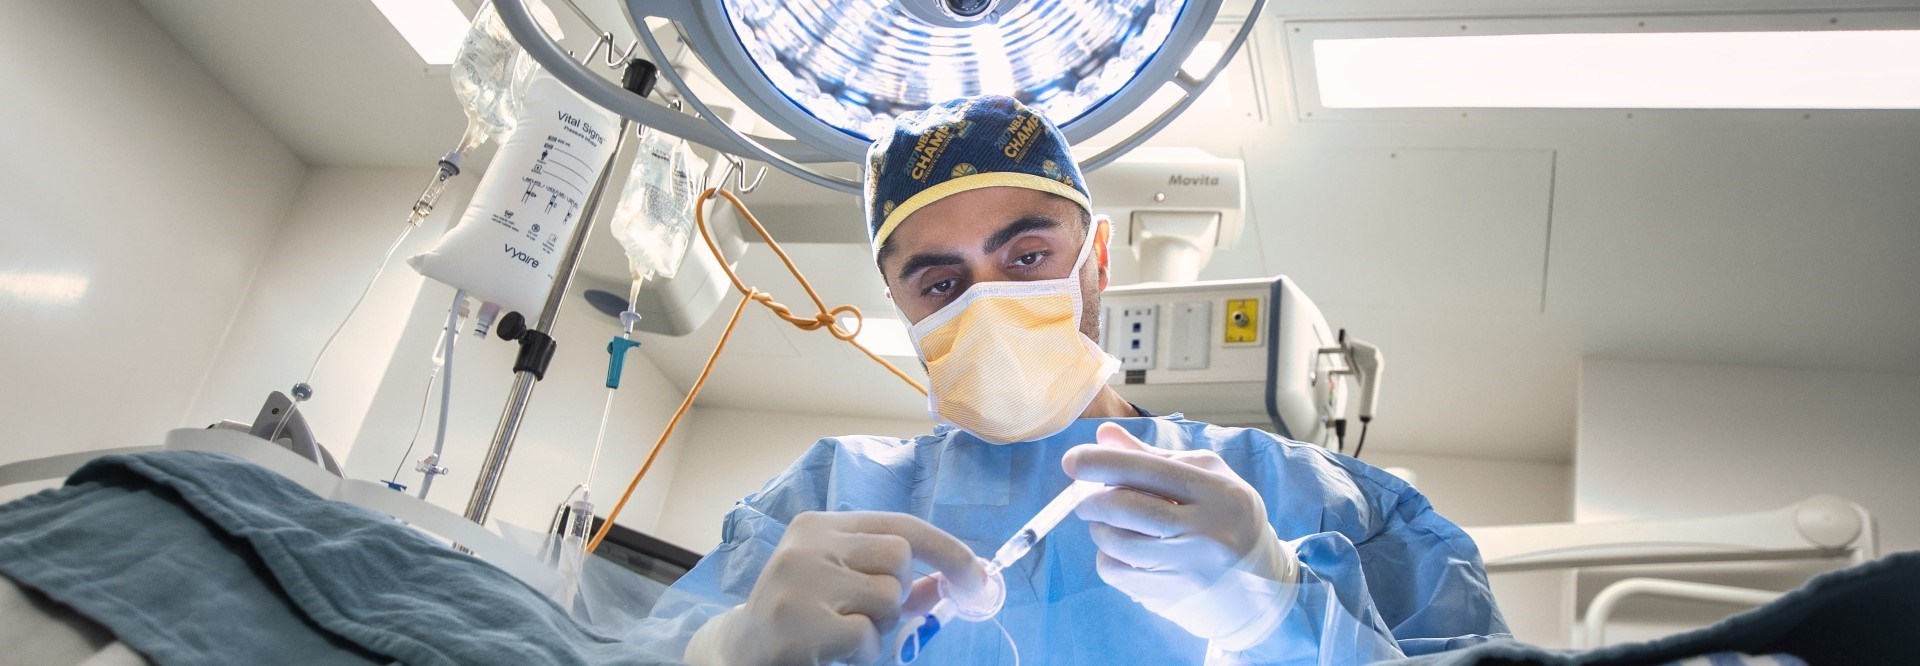 Surgeon in full PPE loading a syringe in an operating room with a bright light above